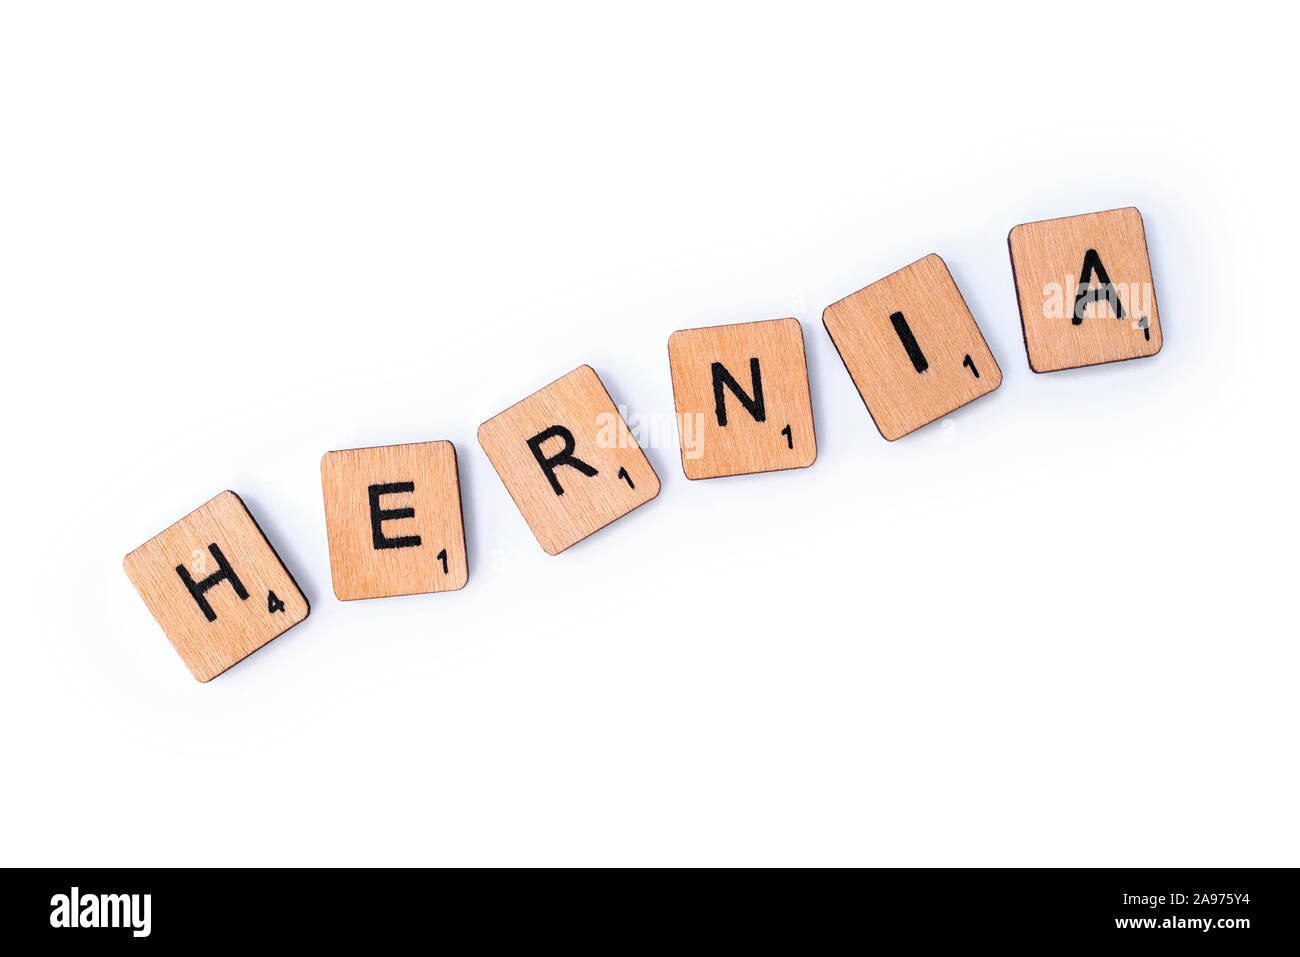 London, UK - July 8th 2019: The word HERNIA, spelt with wooden letter tiles over a white background. Stock Photo